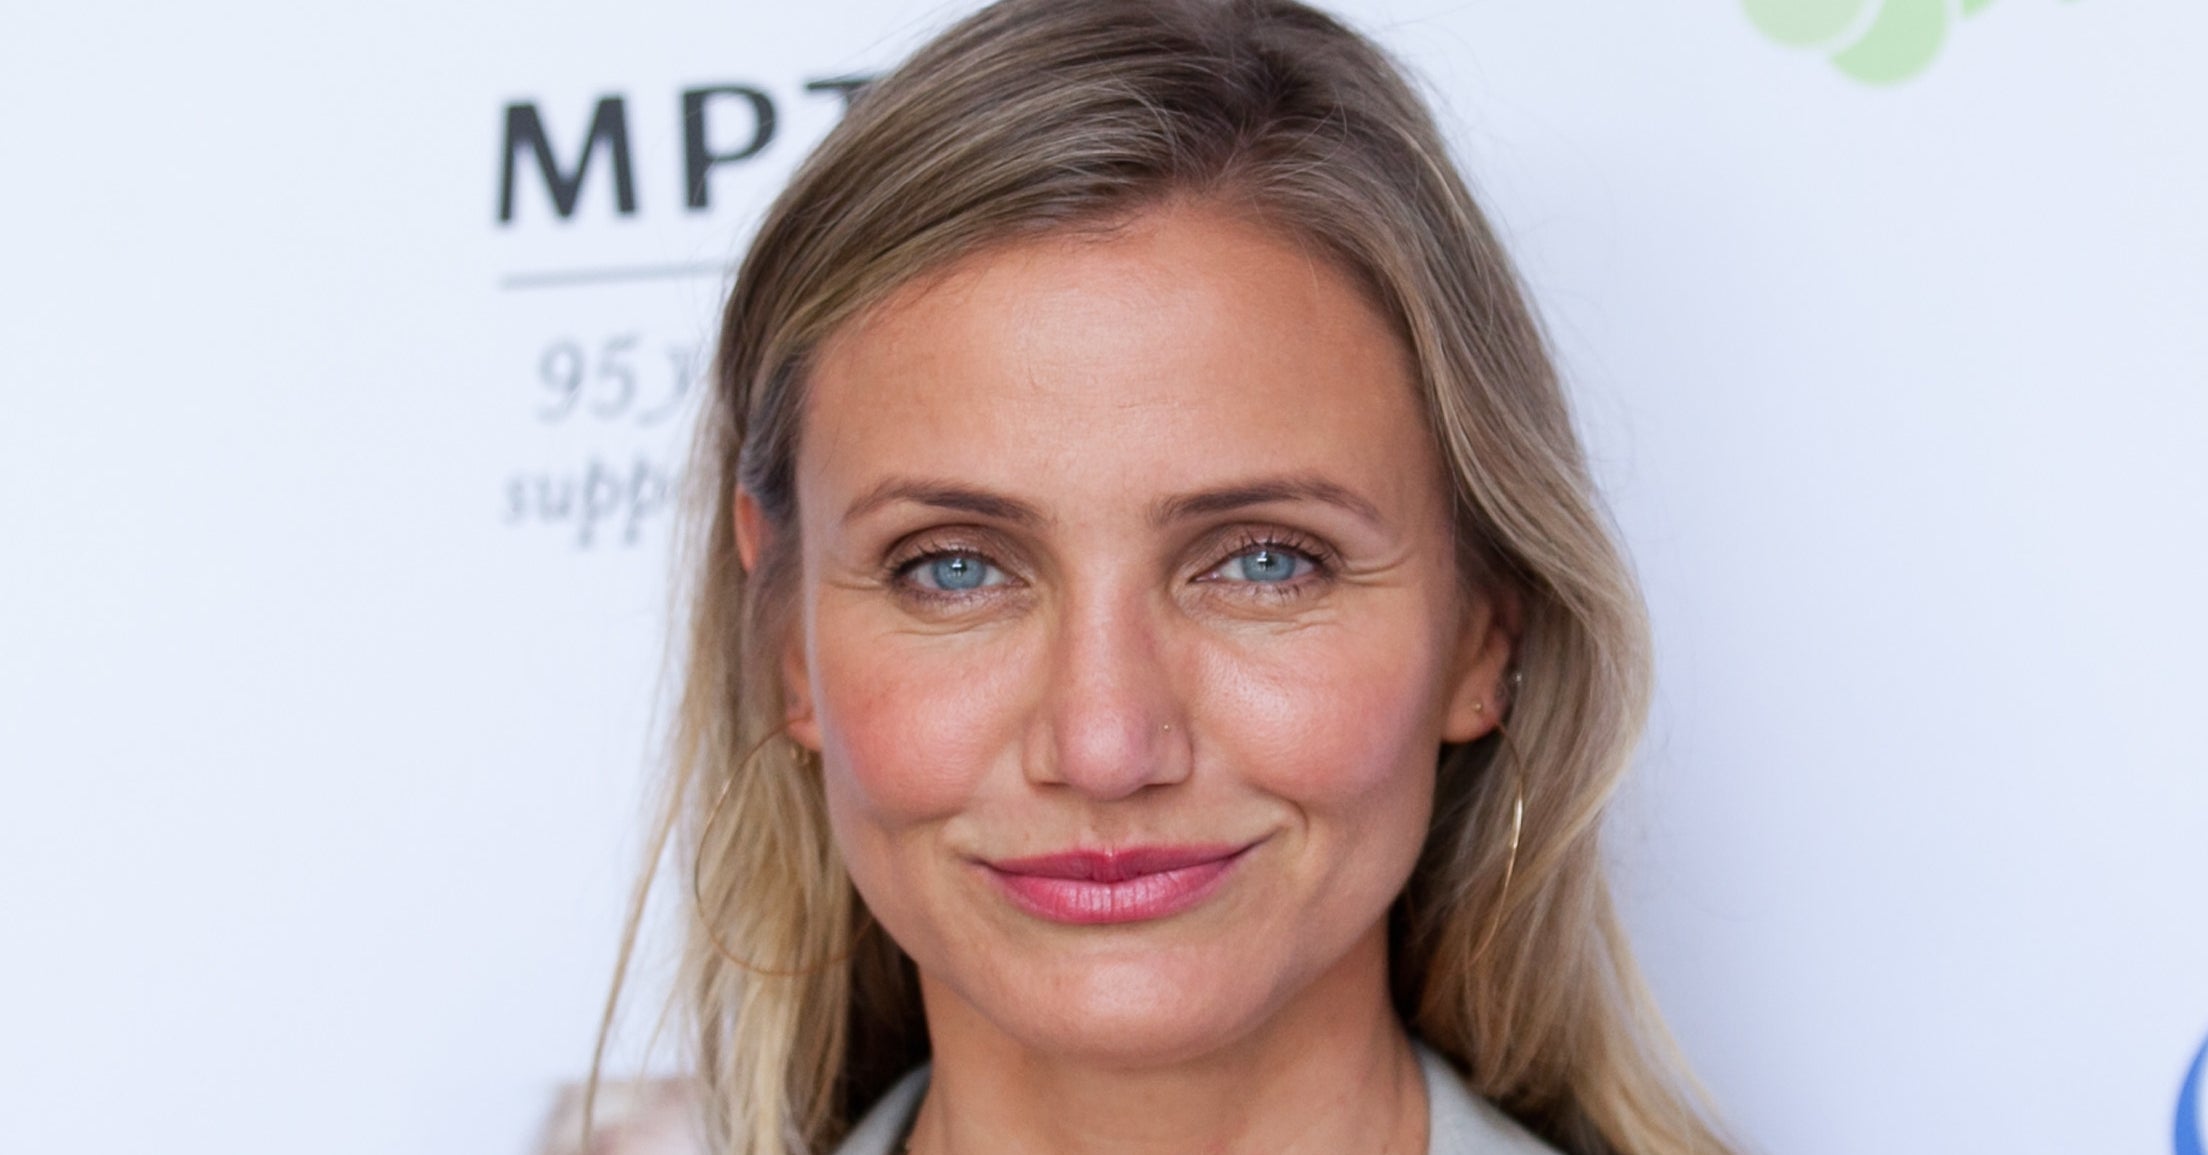 Cameron Diaz Feels "Whole" After Quitting Acting